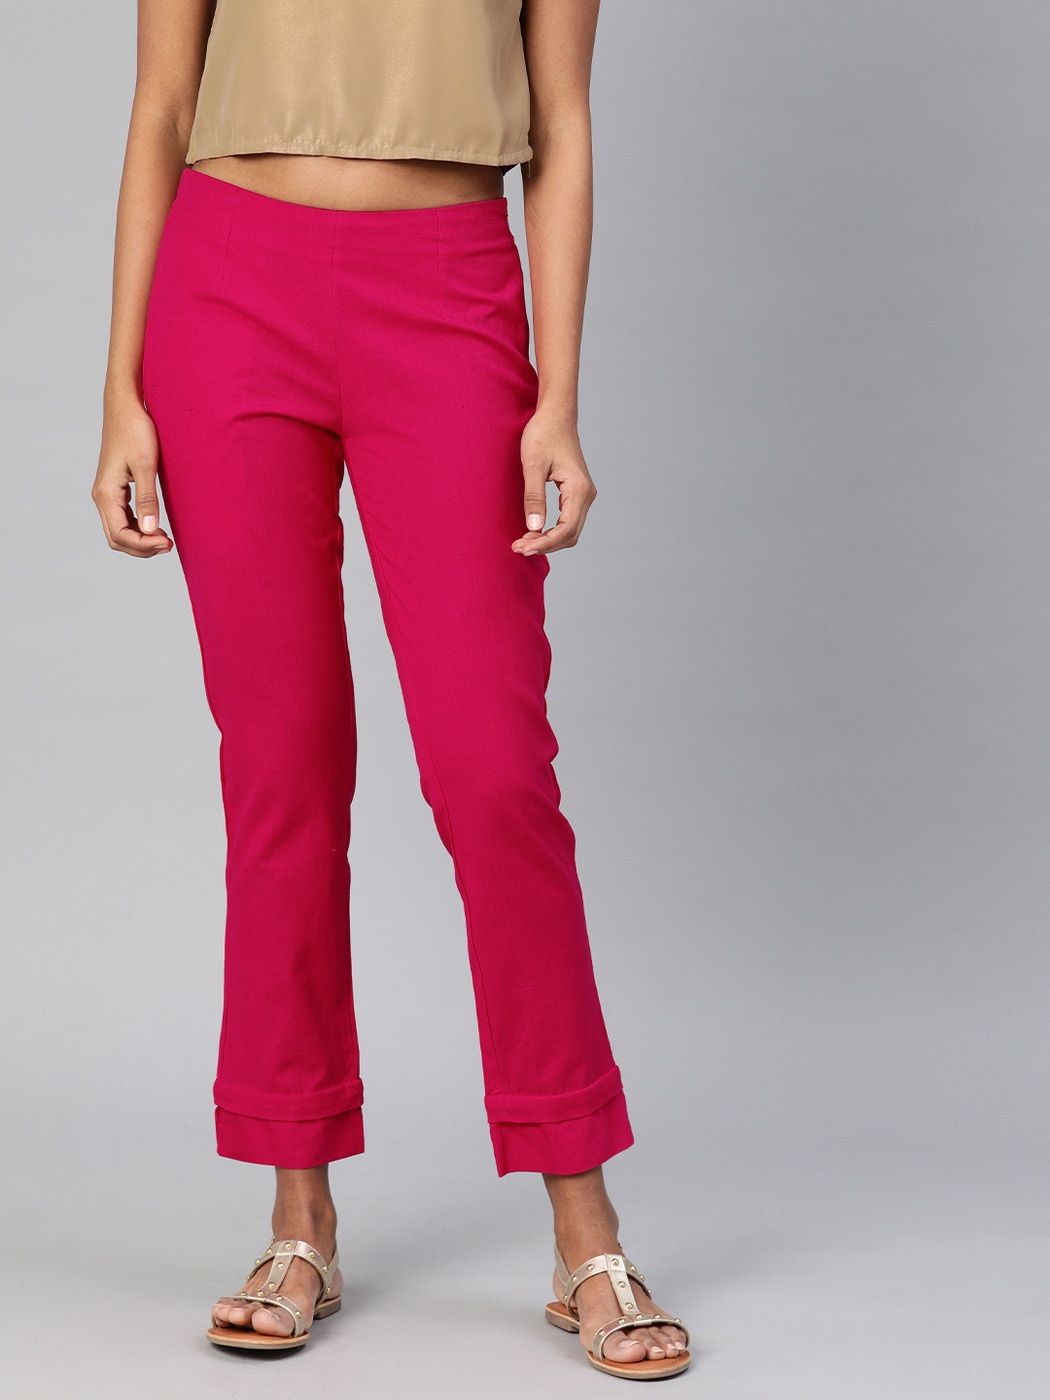 Buy GLOBAL DESI Pink Solid Viscose Straight Fit Women's Casual Wear Pants |  Shoppers Stop